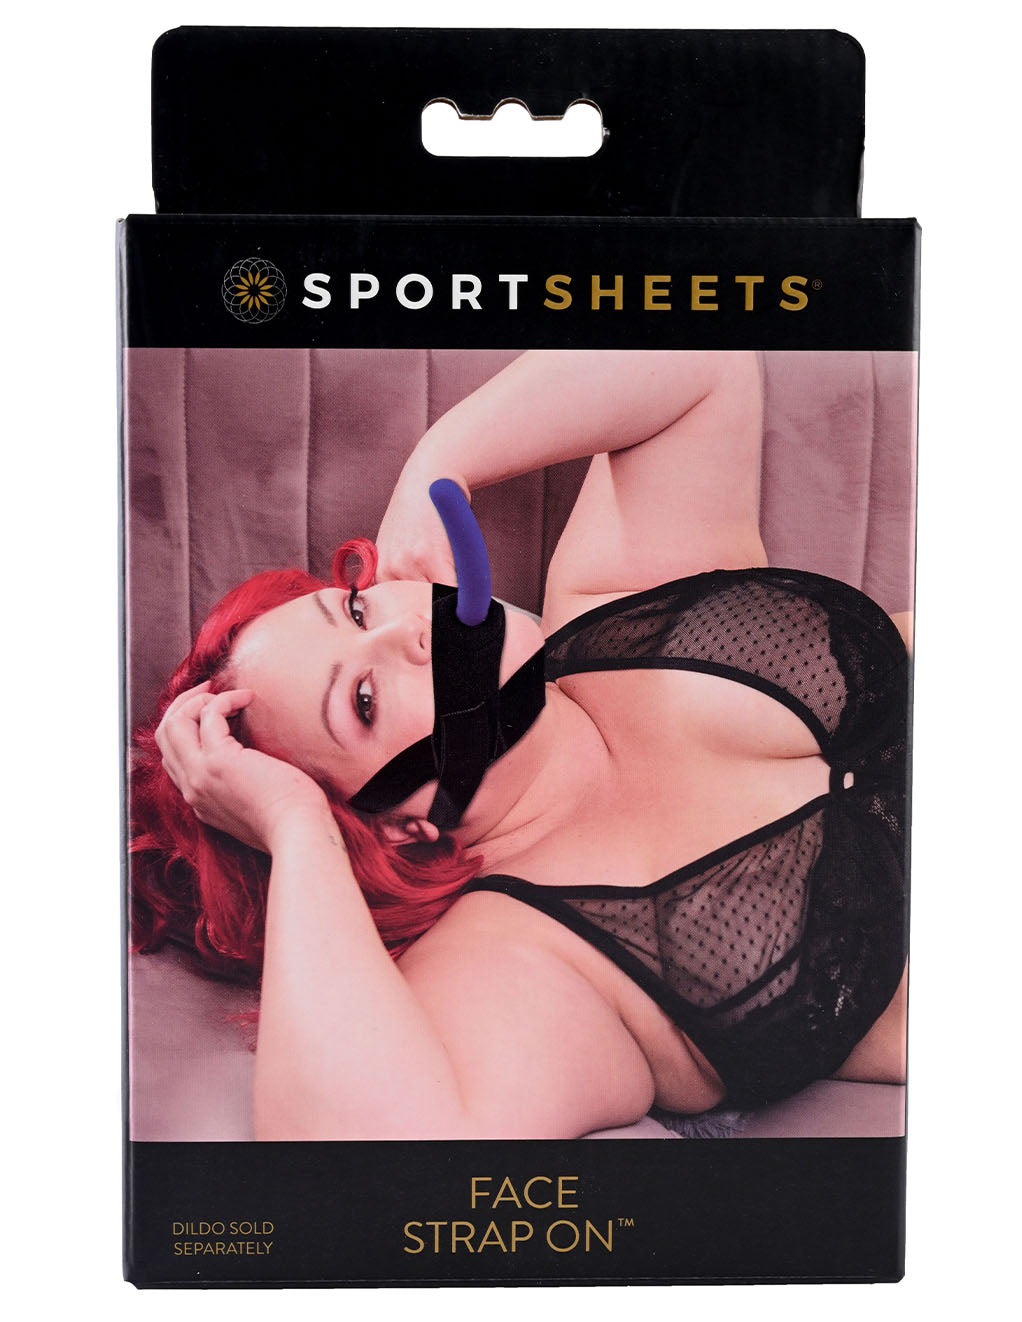 Sportsheets Face Strap On- Package